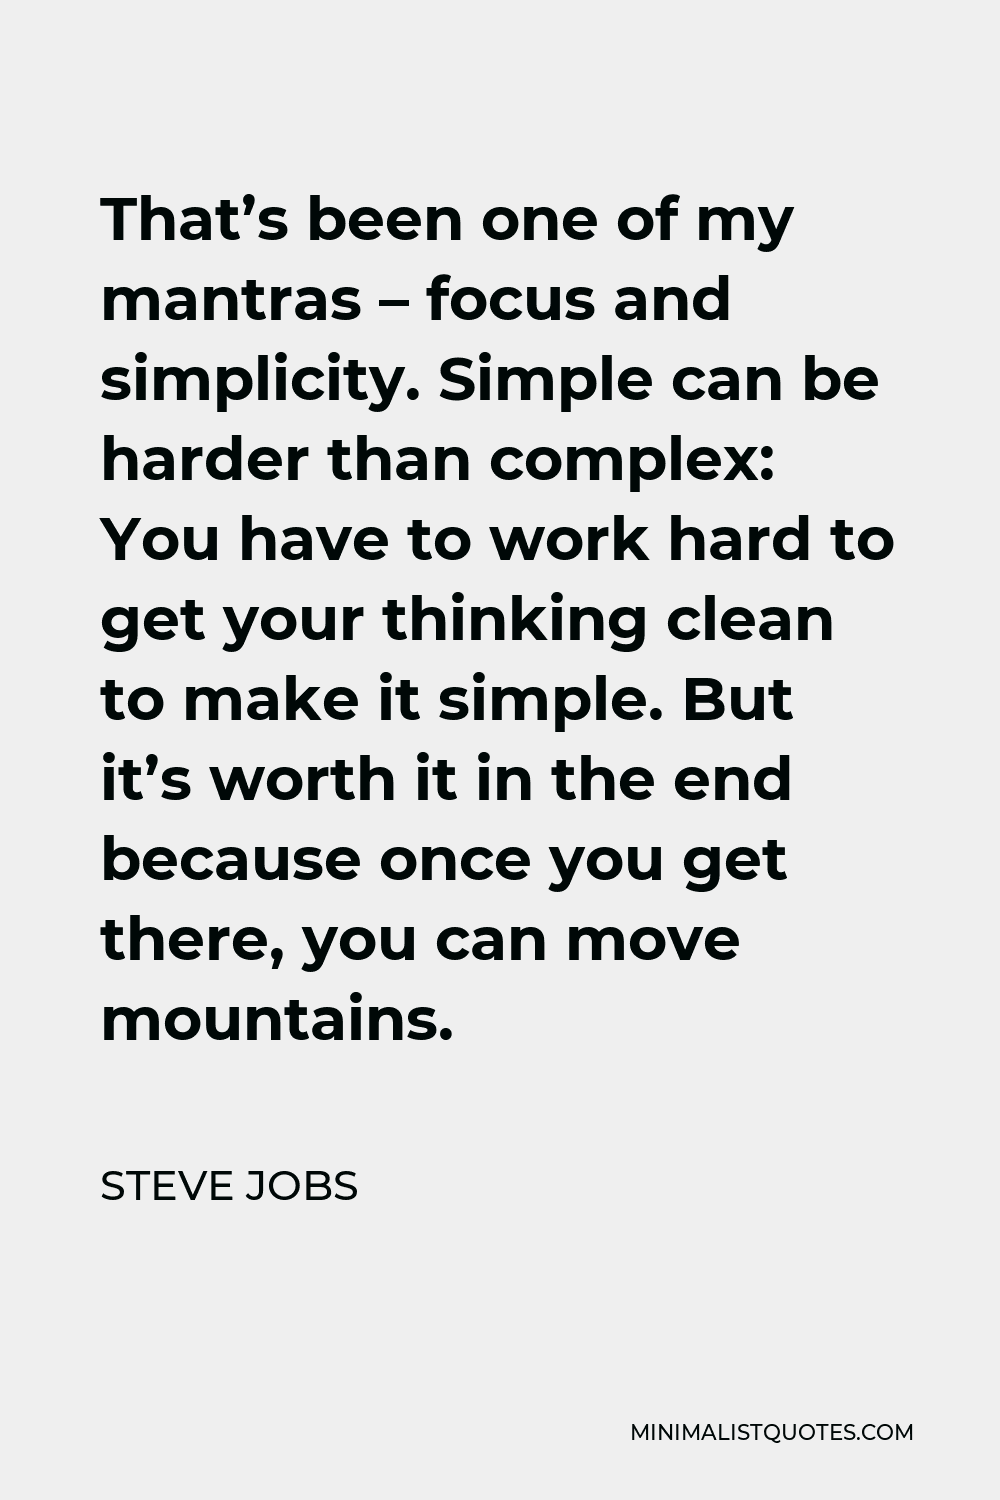 Steve Jobs Quote - That’s been one of my mantras – focus and simplicity. Simple can be harder than complex: You have to work hard to get your thinking clean to make it simple. But it’s worth it in the end because once you get there, you can move mountains.